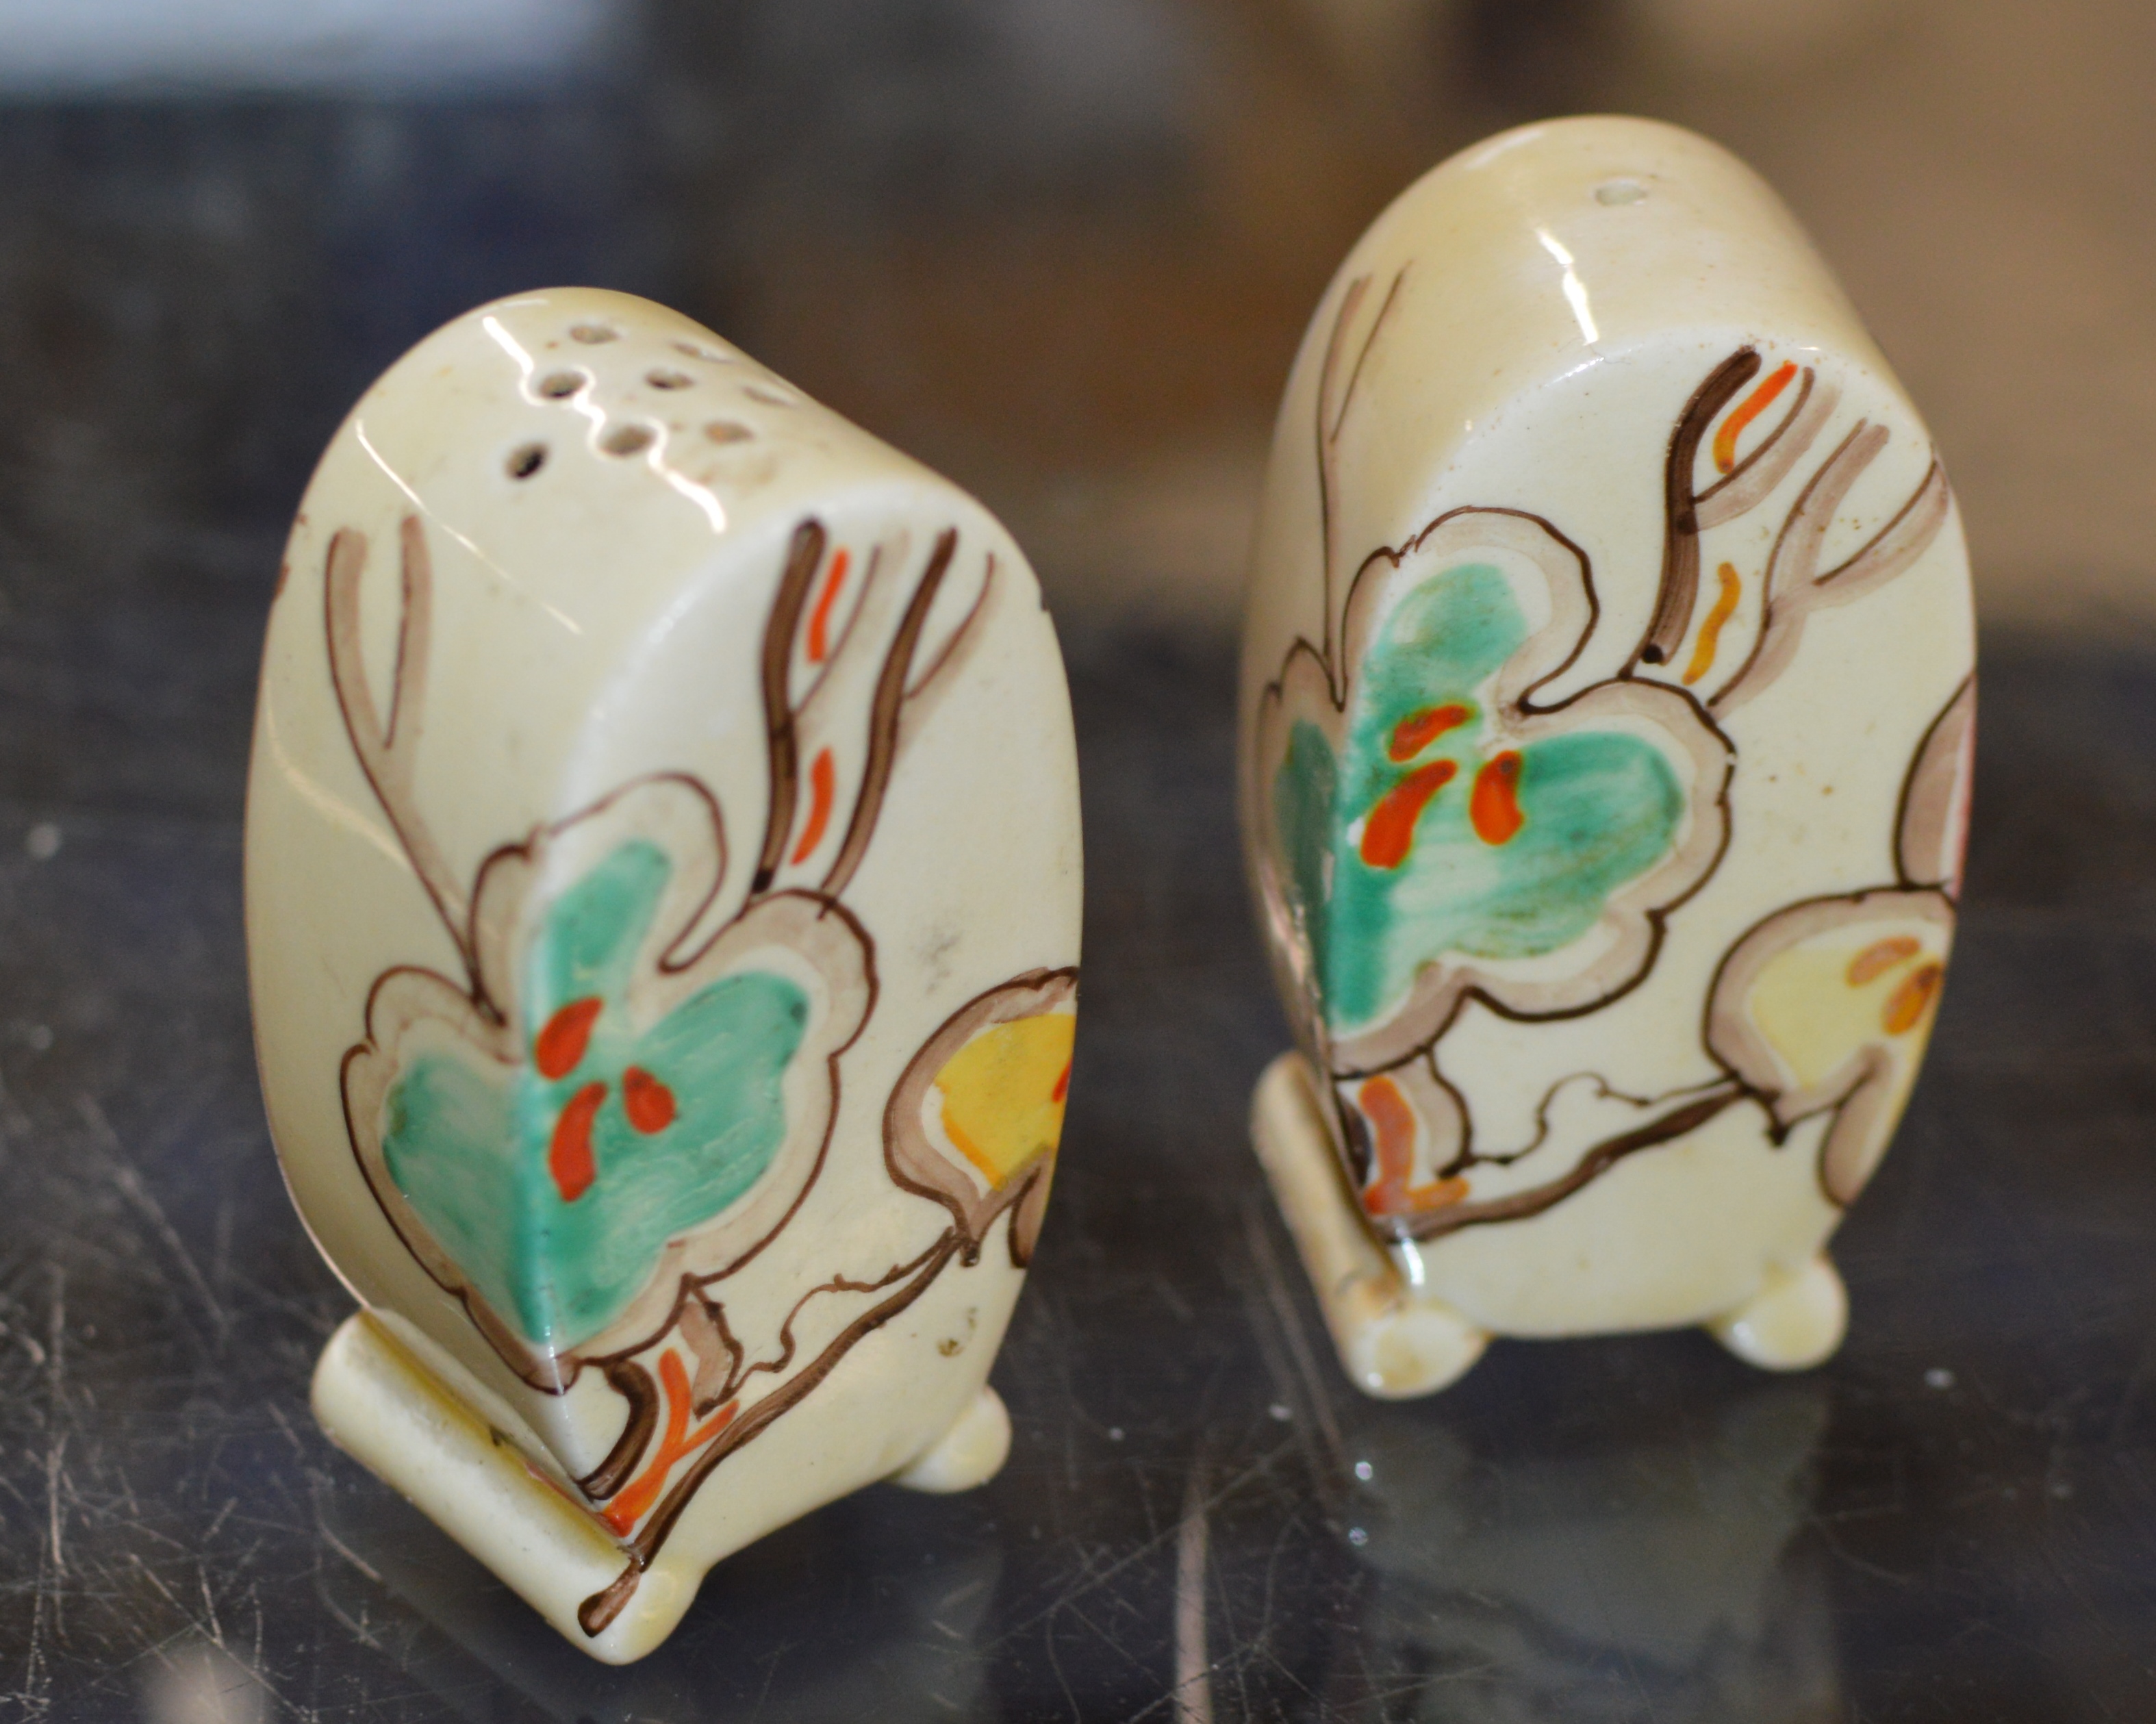 A PAIR OF ART DECO HAND PAINTED SALT & PEPPER CRUETS IN THE STYLE OF CLARICE CLIFF - Image 2 of 4